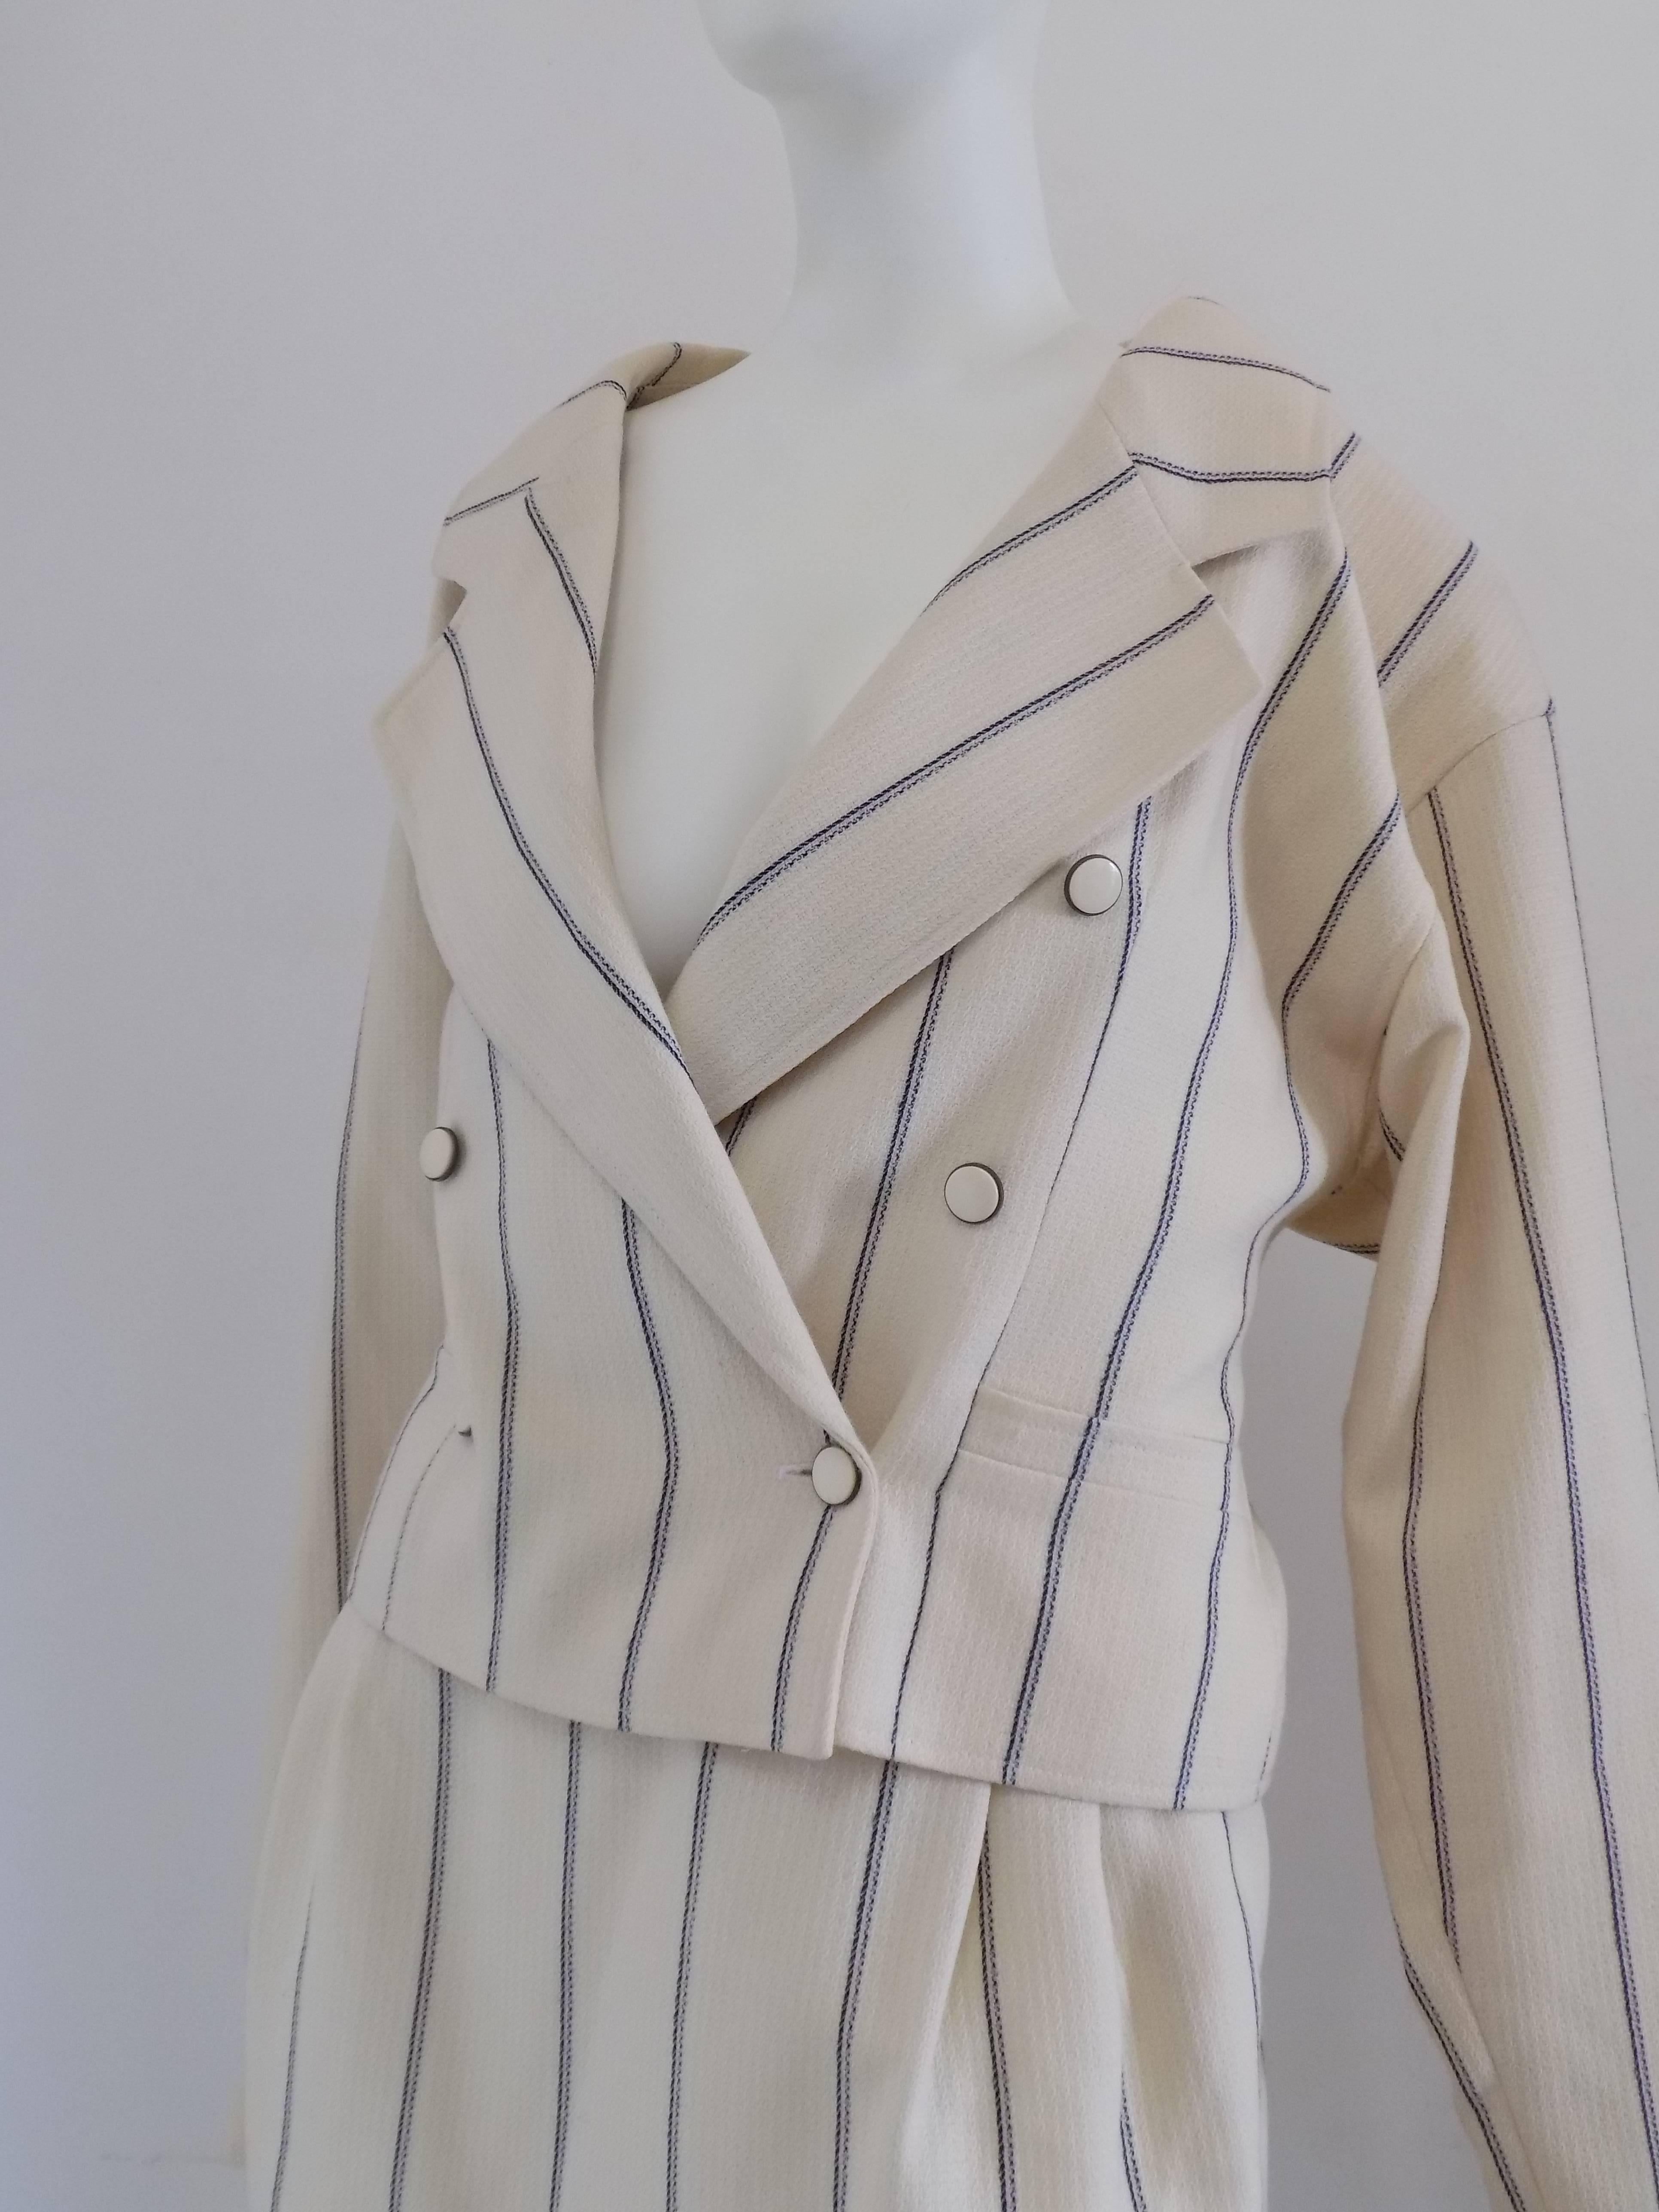 1980s Ungaro beije tailleur
Jacket and skirt beije and blu tailleur by Emanuel Ungaro Solo Donna totally made in italy in italian size range 42
Composition: 98% wool 2% polyamide
Skirt measurement:
waist 70 cm
total lenght 74 cm
Jacket